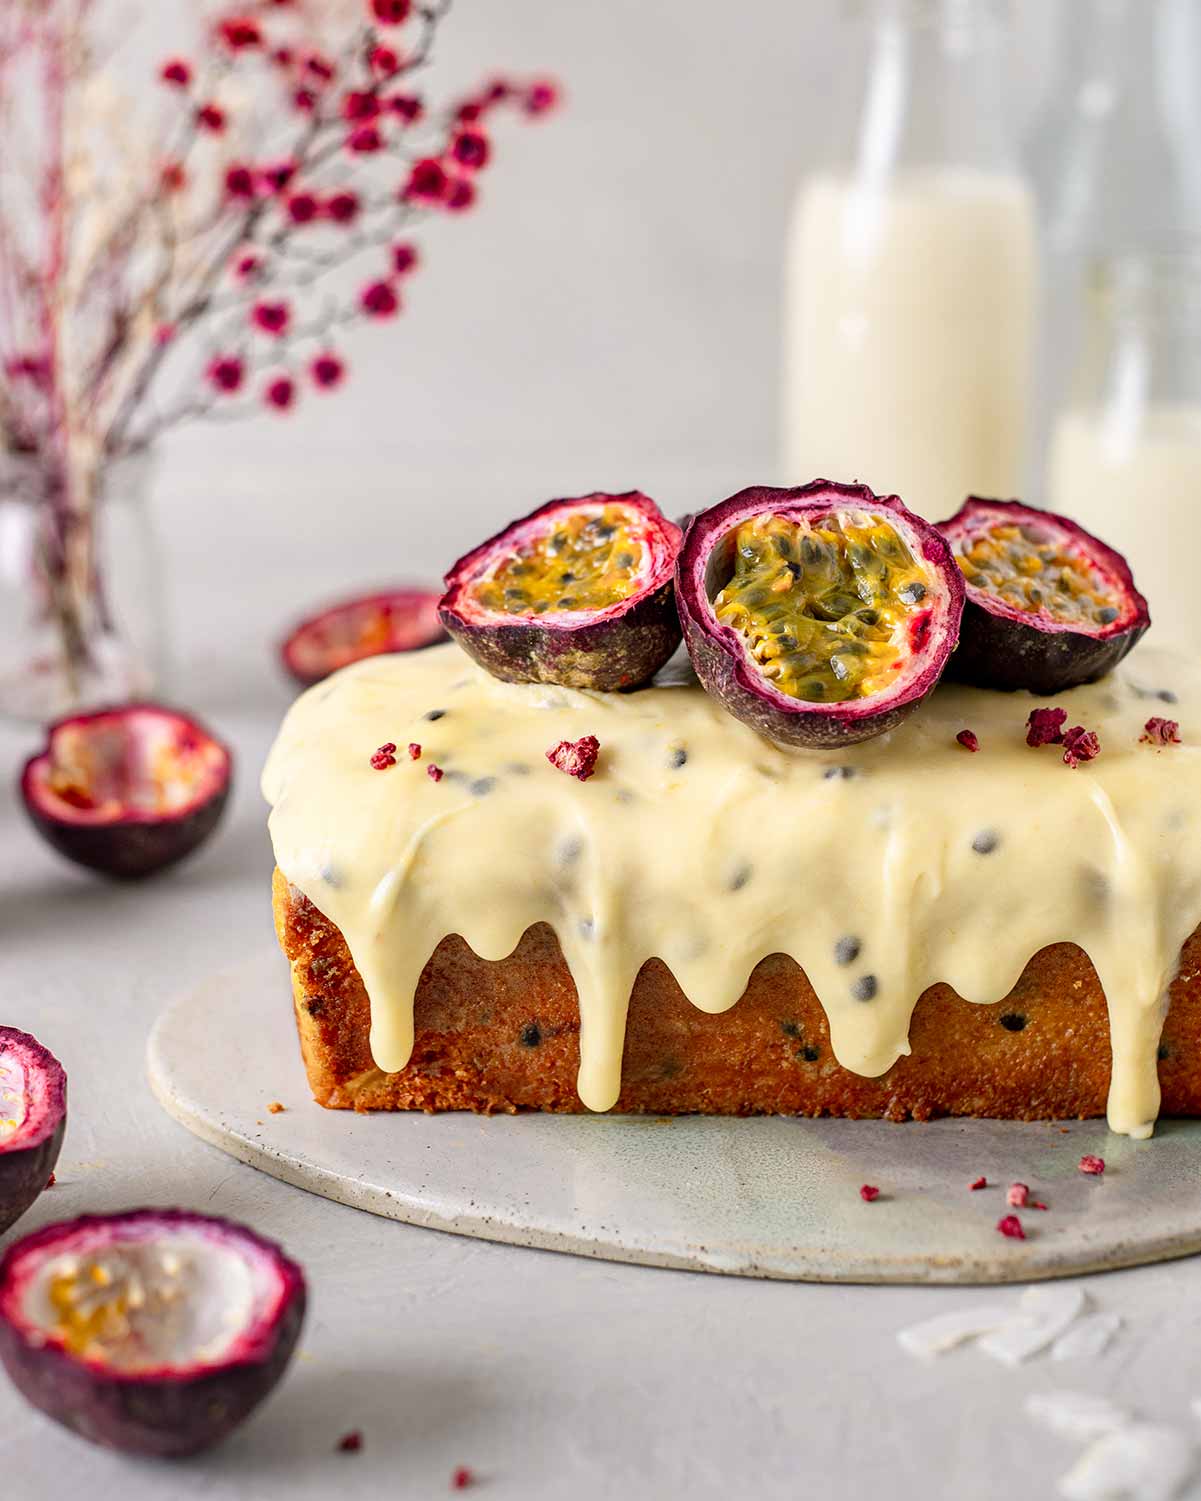 Side of vegan passionfruit cake with icing dripping down the sides.